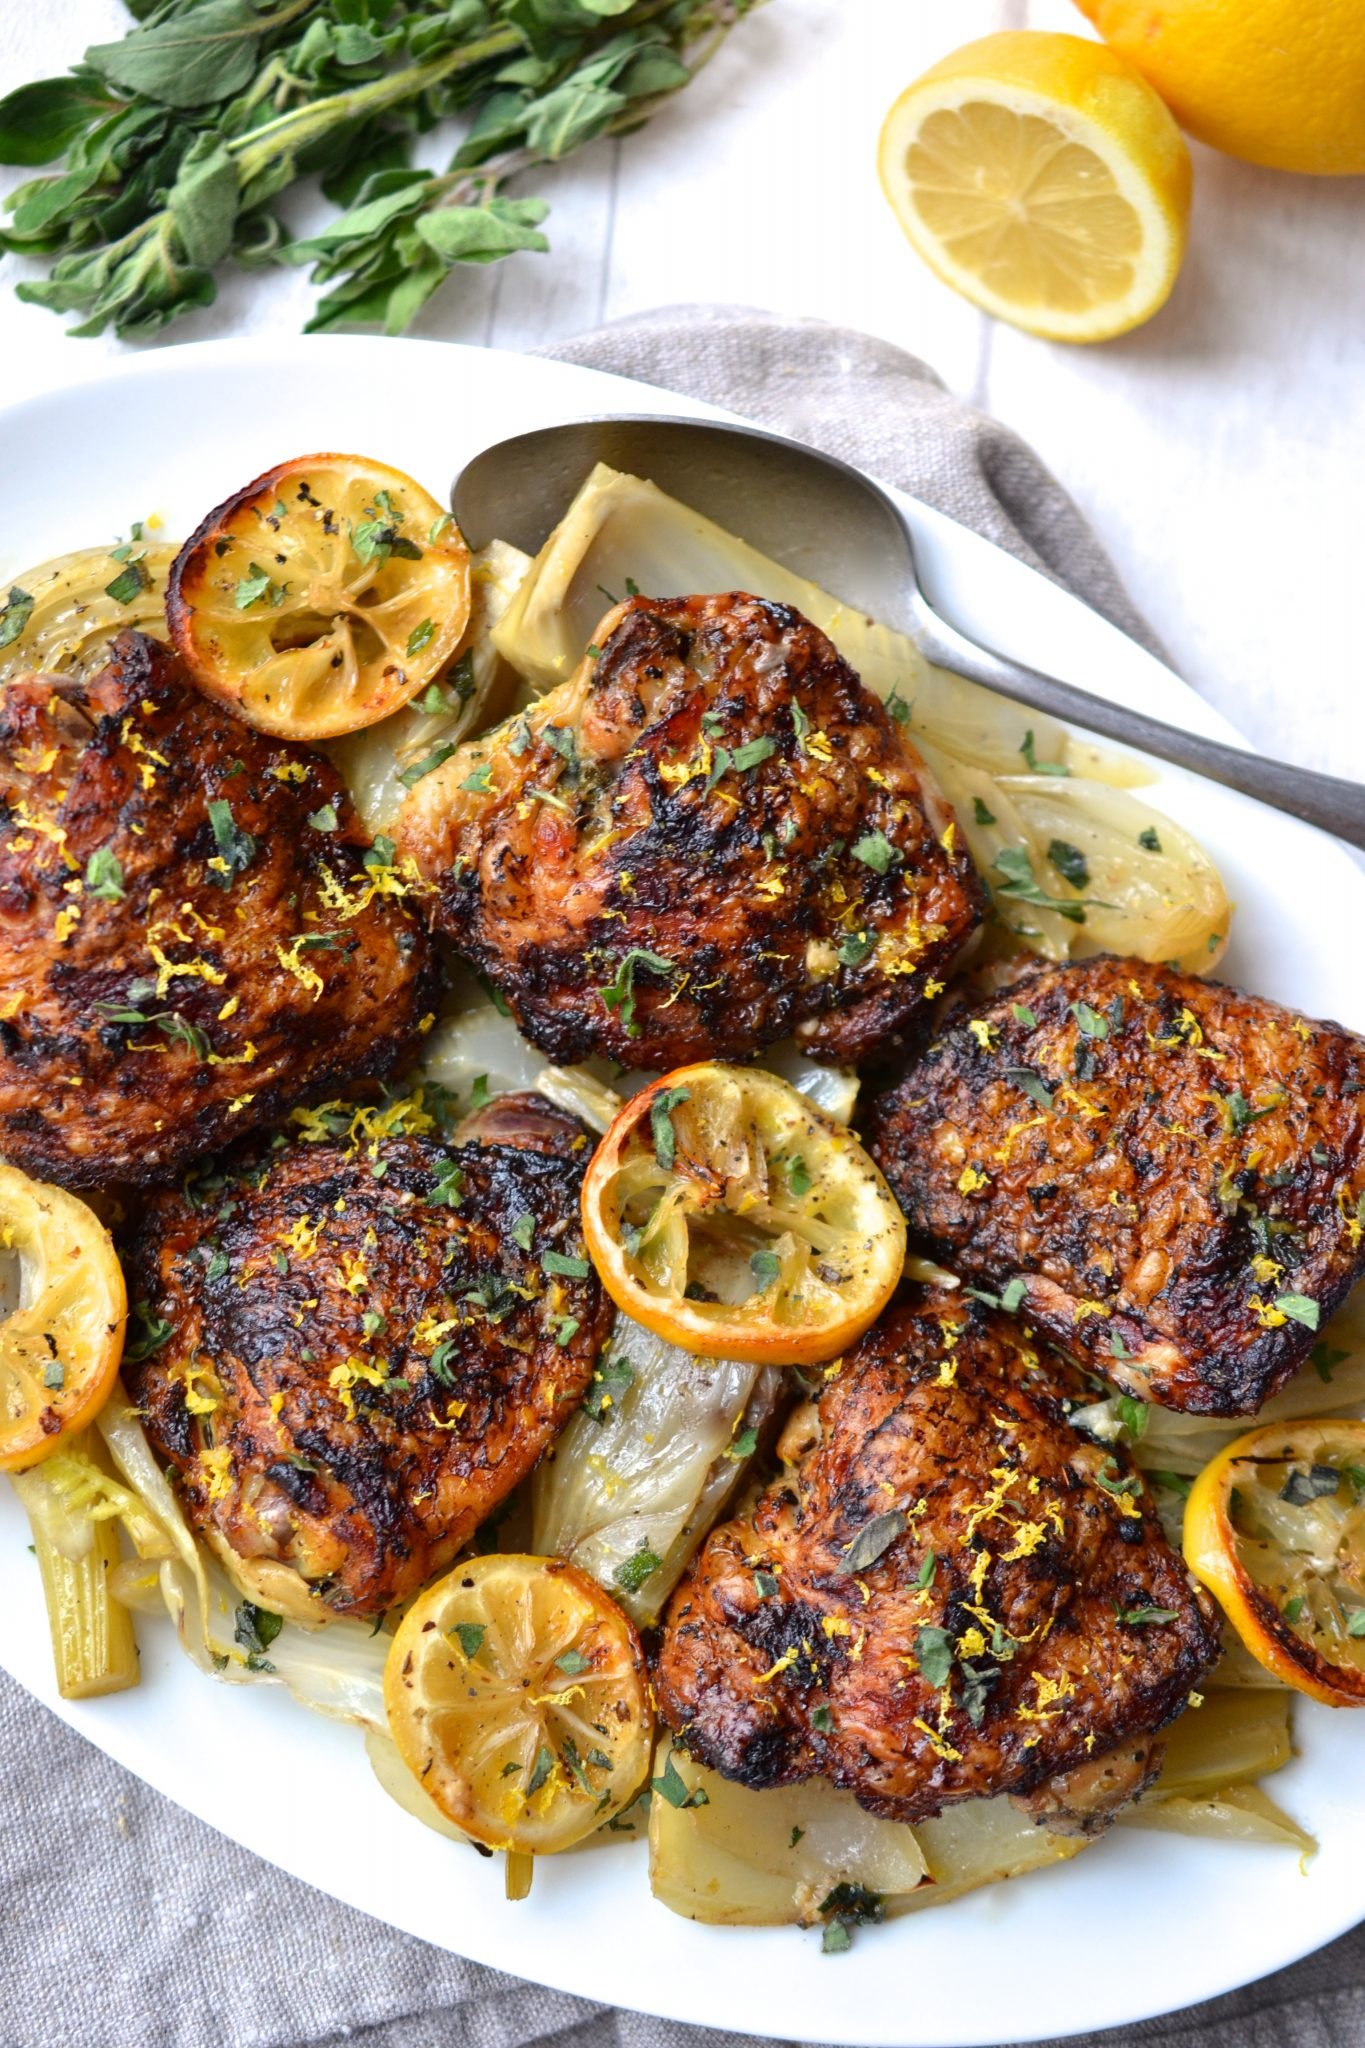 Lemon & Herb Chicken with Fennel (Whole30 - Keto) - Every Last Bite